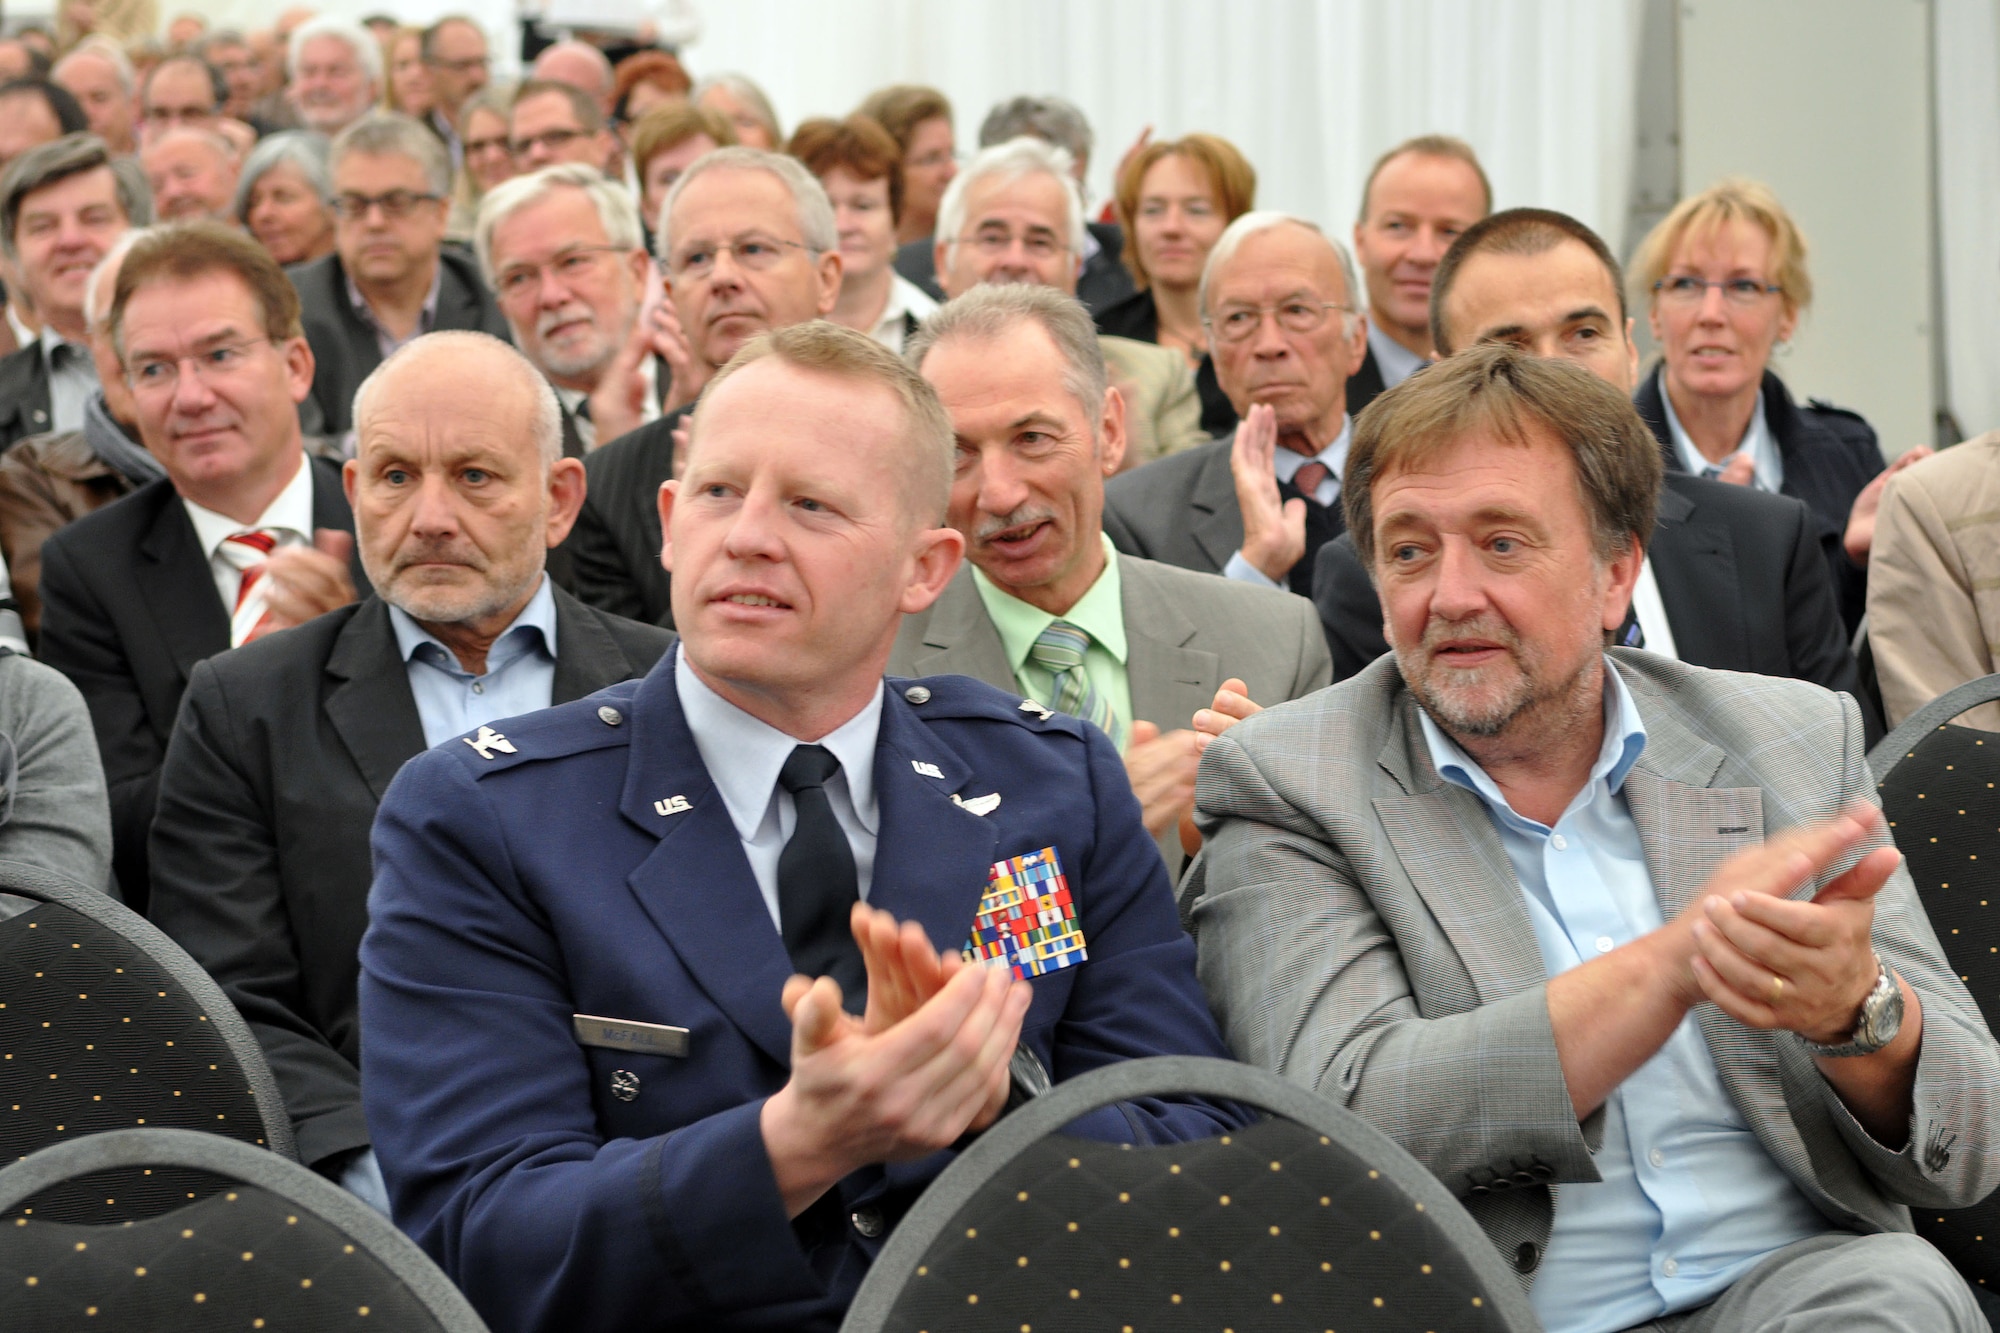 WITTLICH, Germany – Col. Joseph McFall, 52nd Fighter Wing vice commander, and Bernhard Schaefer, 52nd FW community relations advisor, were among the invited guests at the opening ceremonies of the 2012 Wittlich Commerce Fair Sept. 21 here. Joachim Rodenkirch, mayor of Wittlich, thanked guests and representatives from the political, economic and cultural arena for their attendance. The Wittlich mayor expressed his thanks to the commander and Spangdahlem Air Base for continuous support and engagement in the local community. (U.S. Air Force photo by Iris
Reiff/Released)